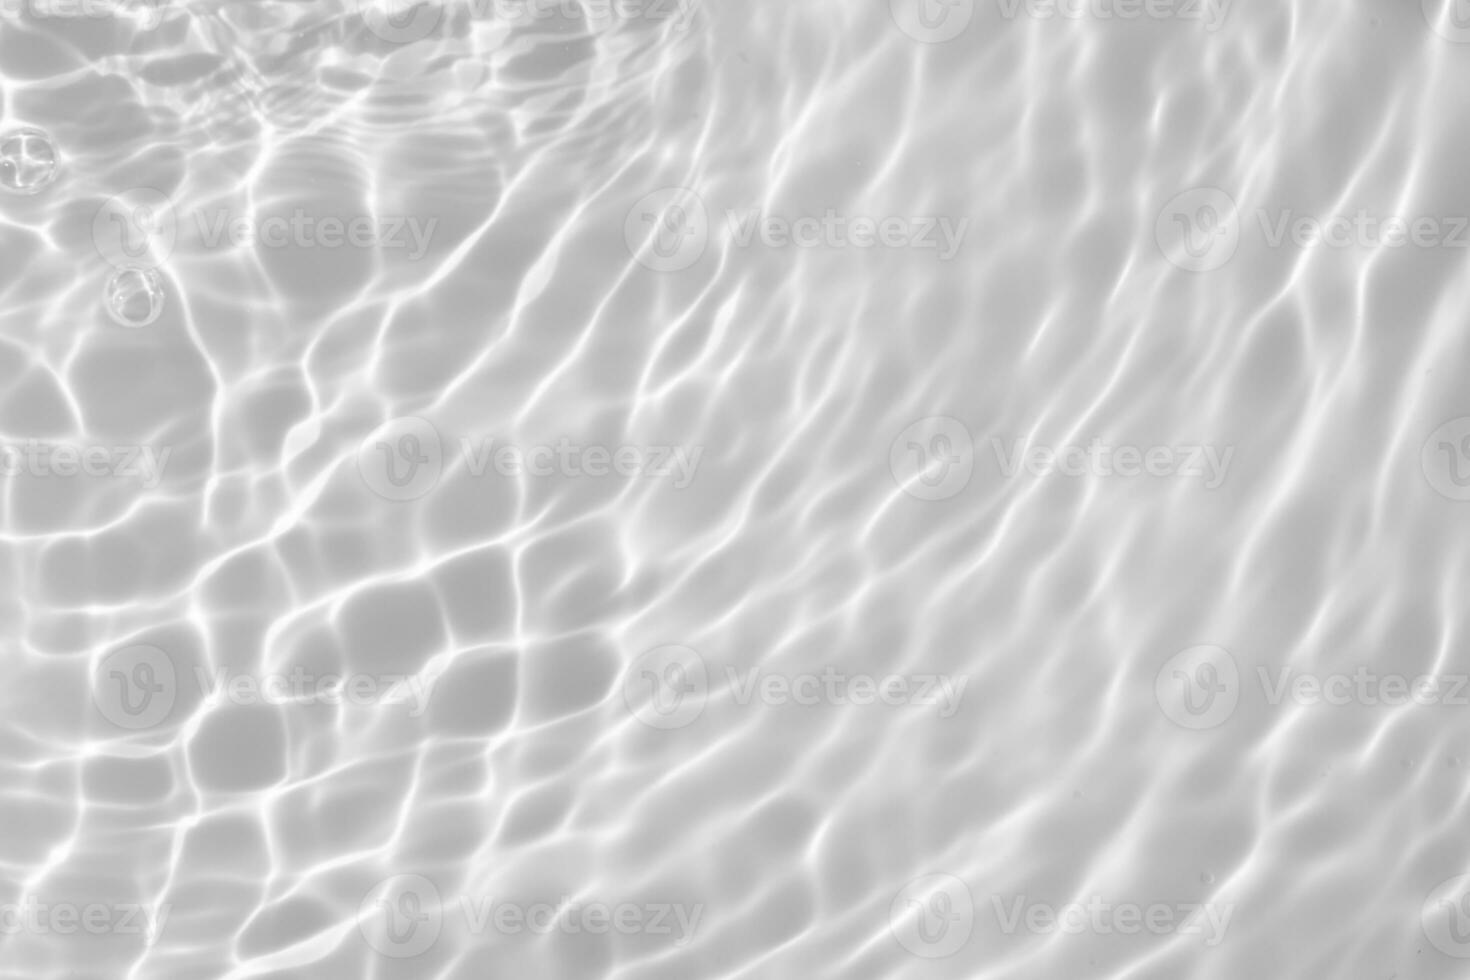 Abstract white transparent water shadow surface texture natural ripple background photo